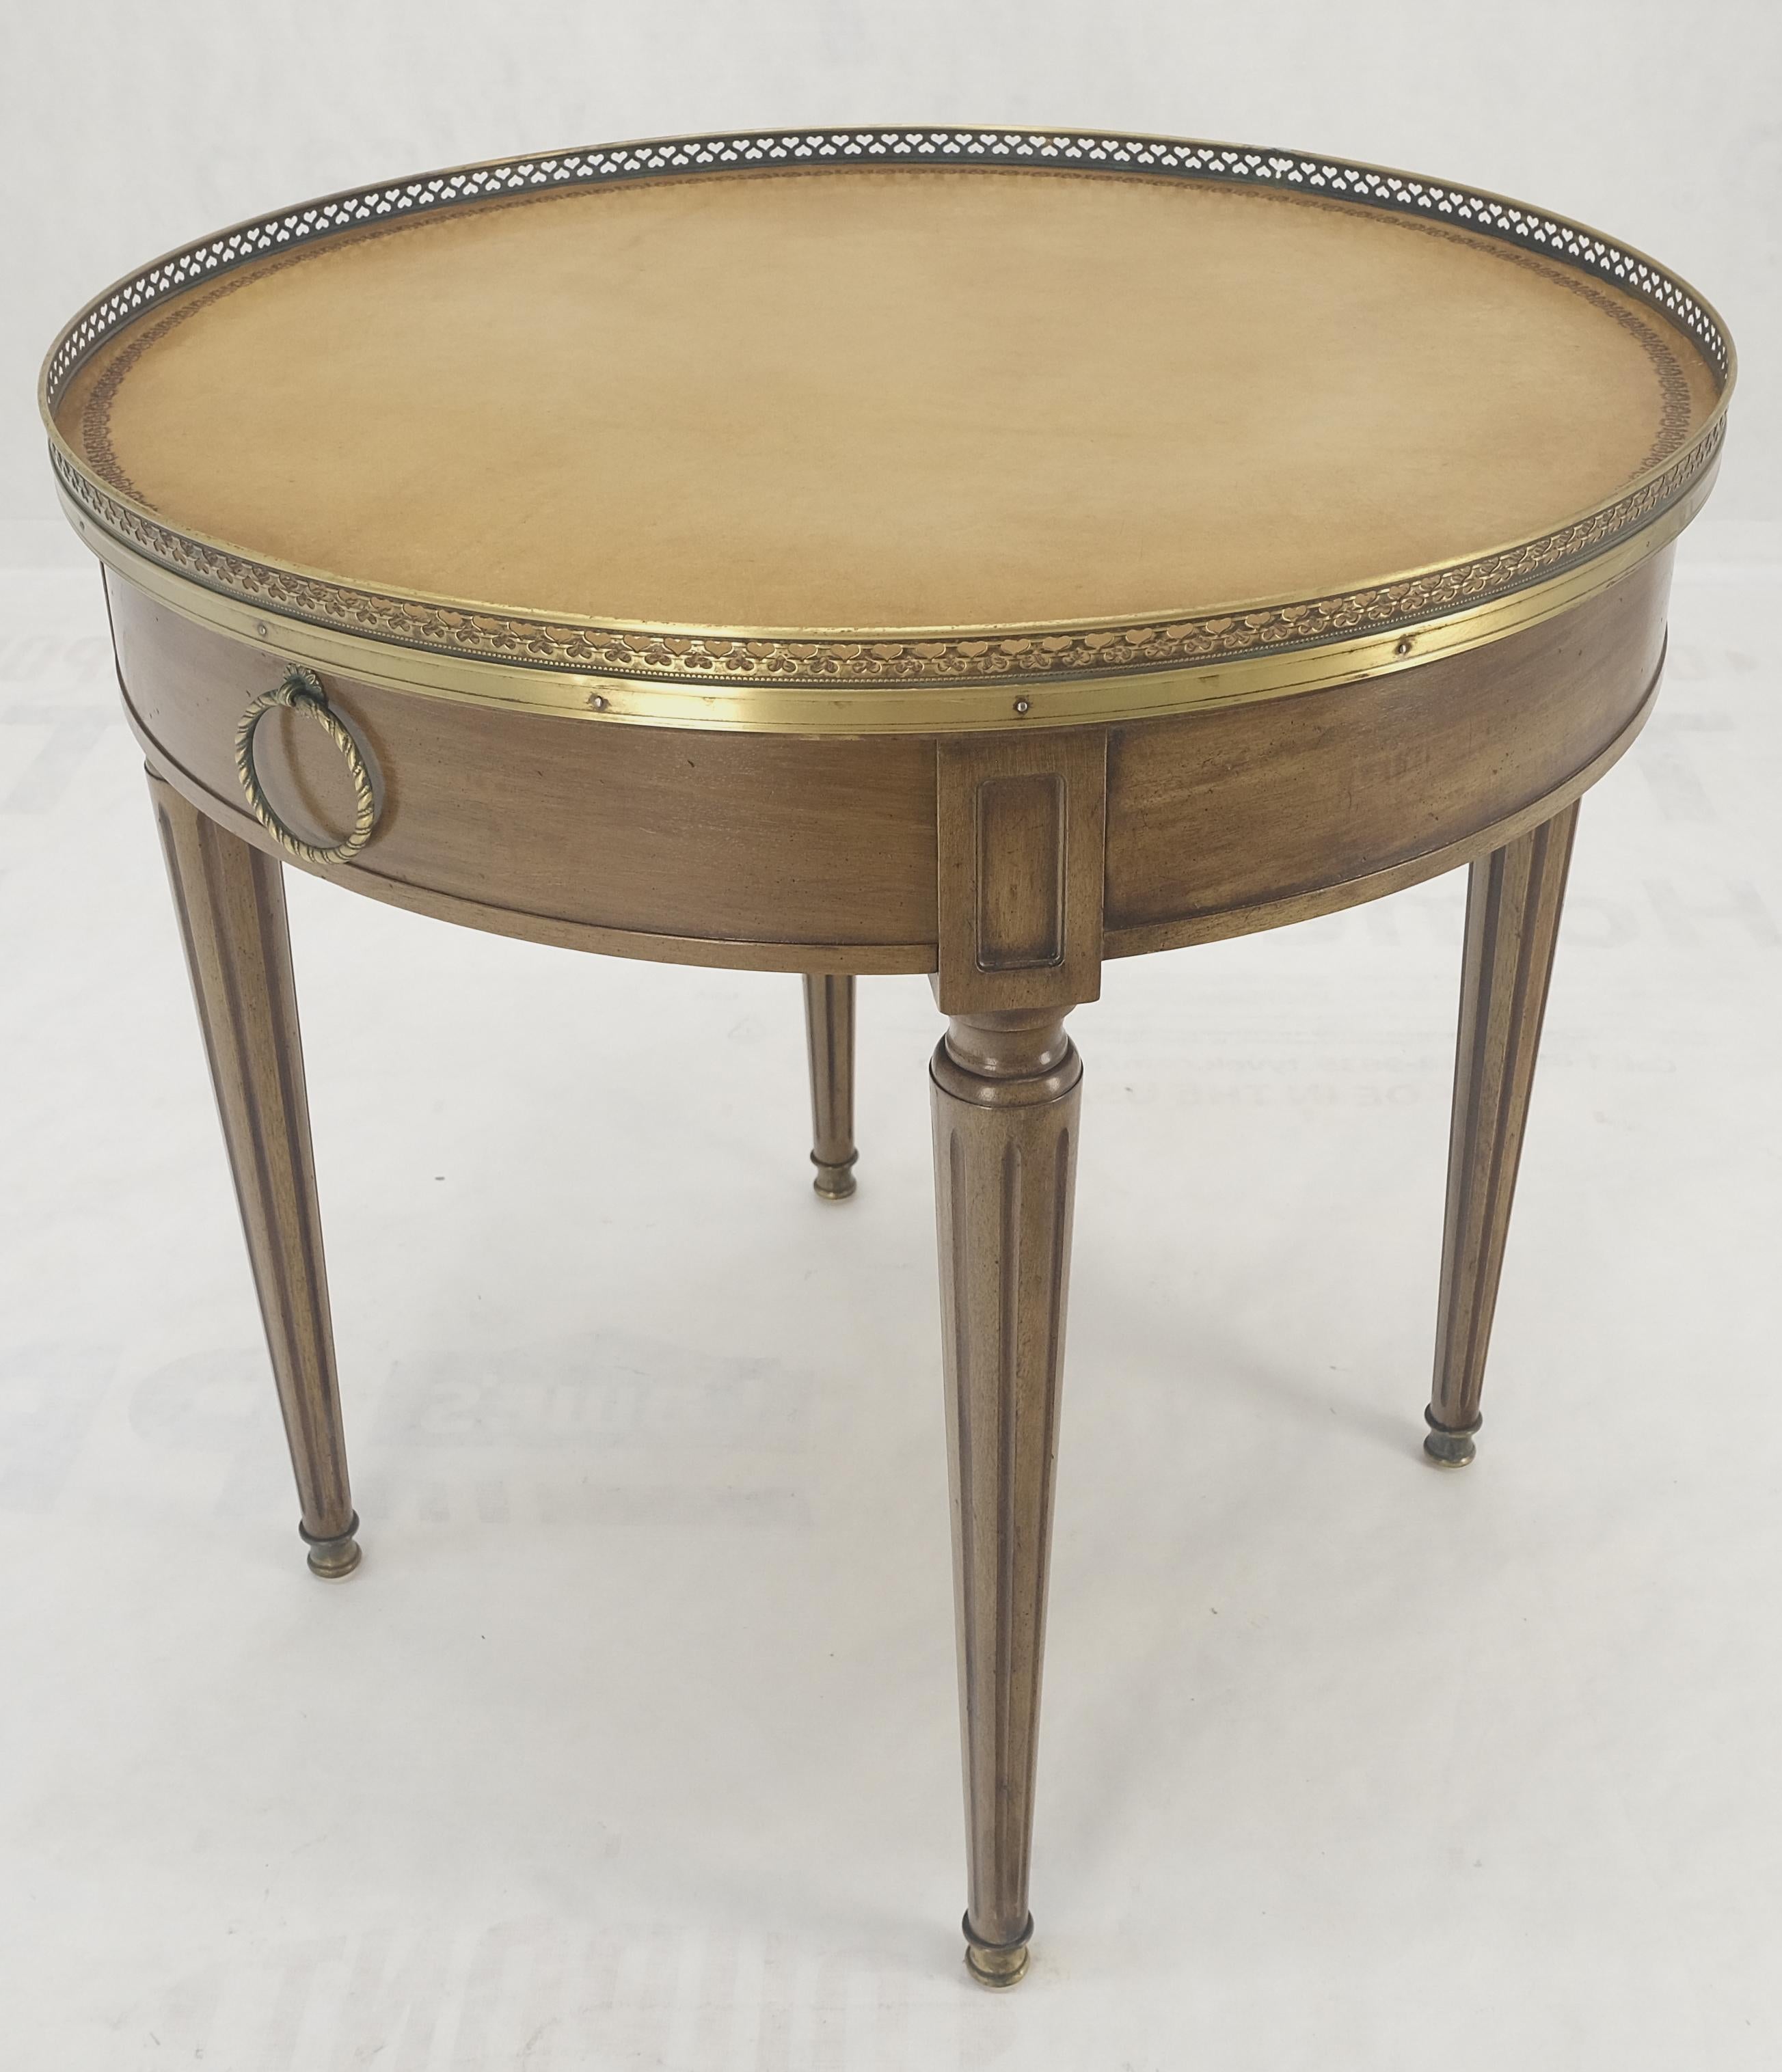 Henredon Olive Green Round Leather Top Brass Gallery Drop Pull Side Table MINT! In Good Condition For Sale In Rockaway, NJ